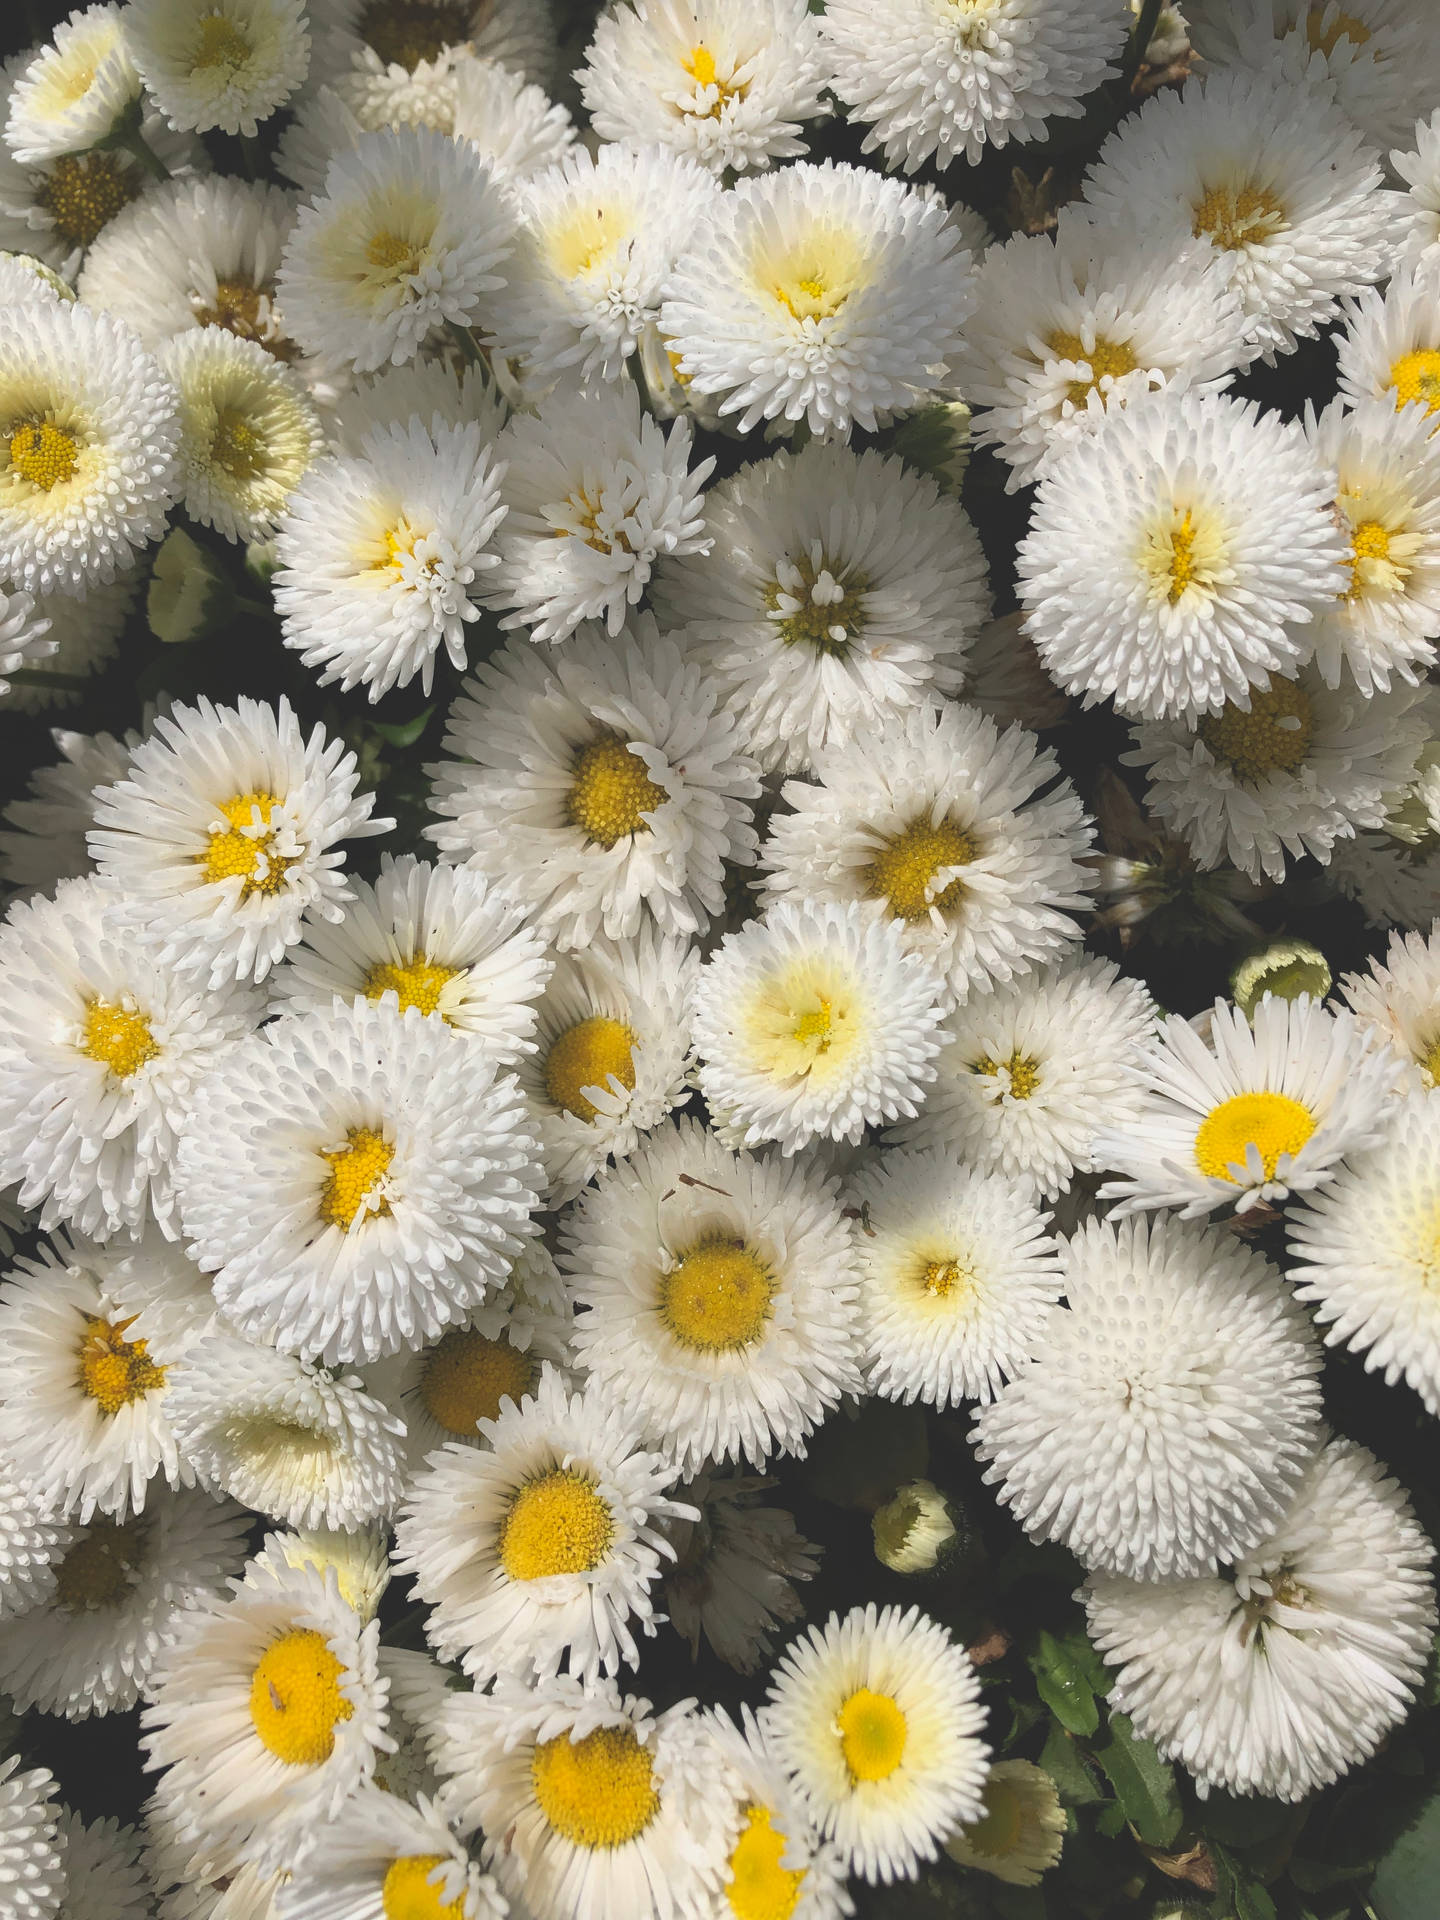 Aesthetic Daisy Flowers Picture